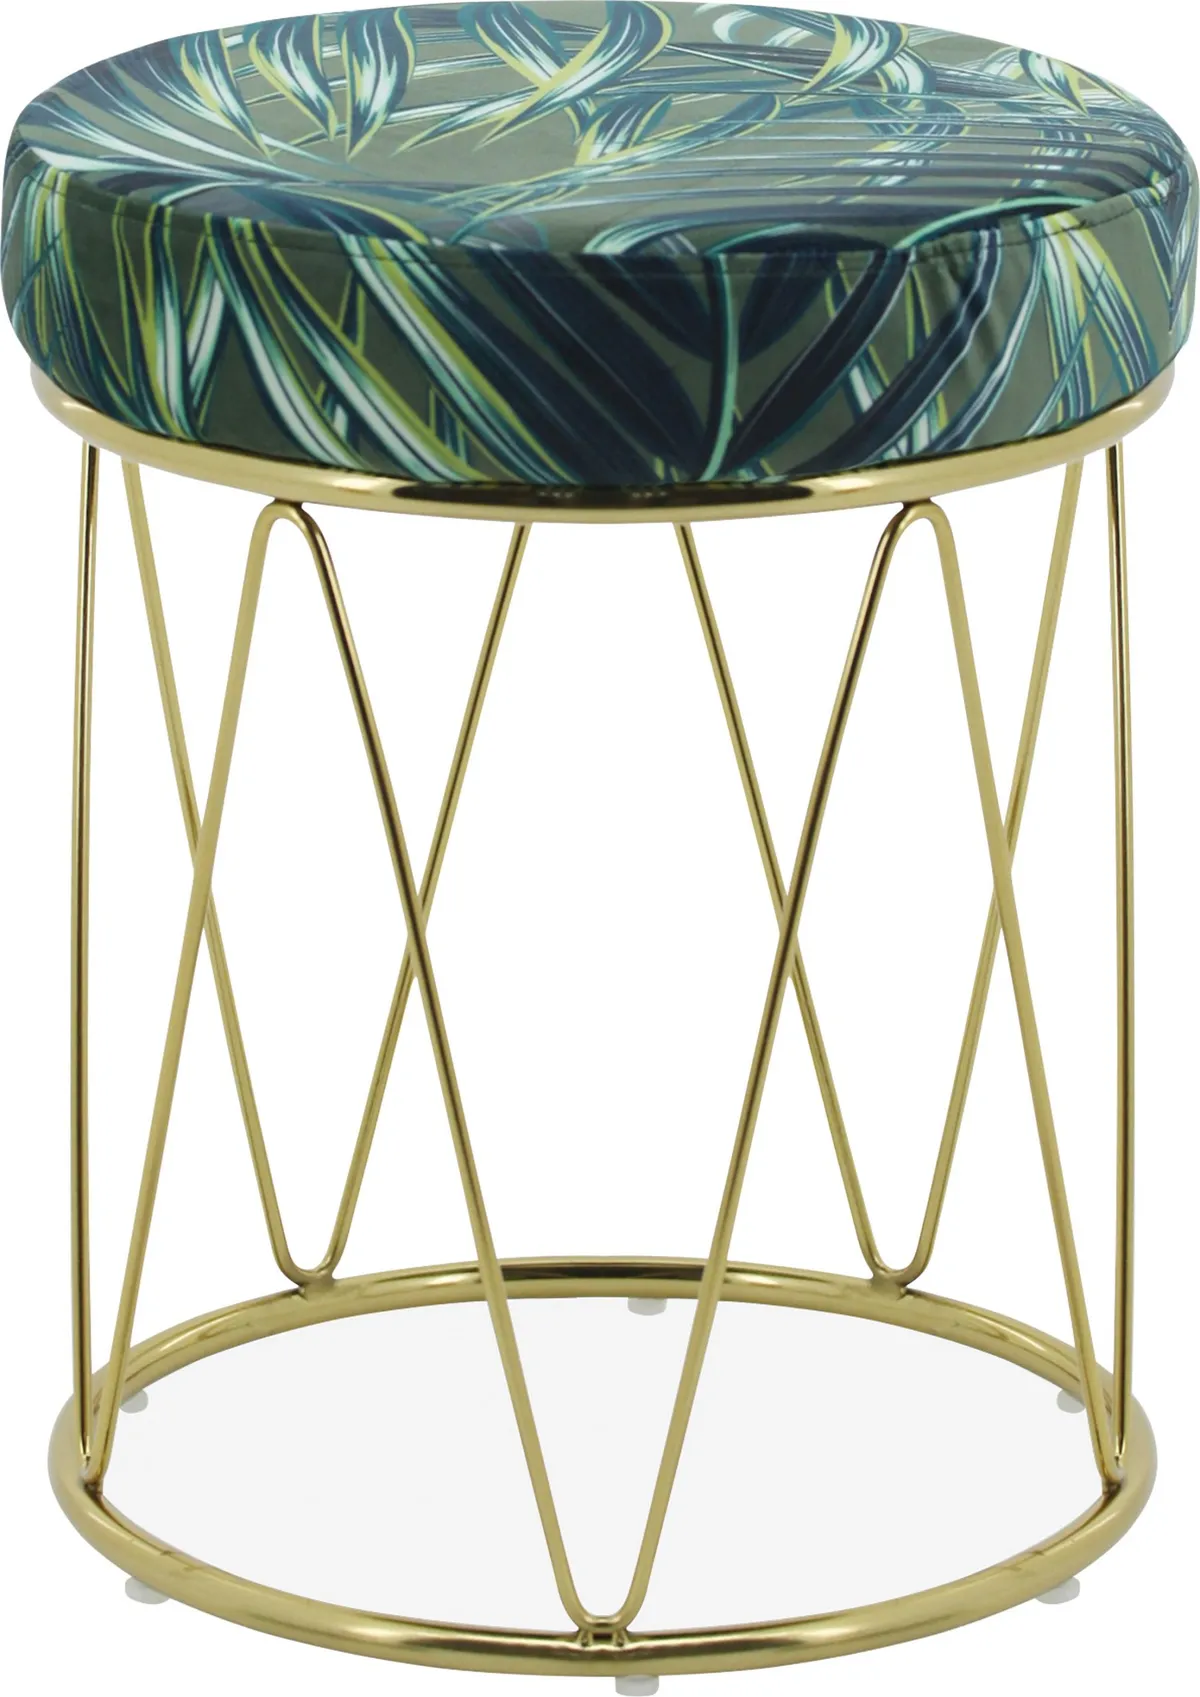 £59 from Cult Furniture Accessorise a vanity table with this Harmony geometric low stool in plush velvet.